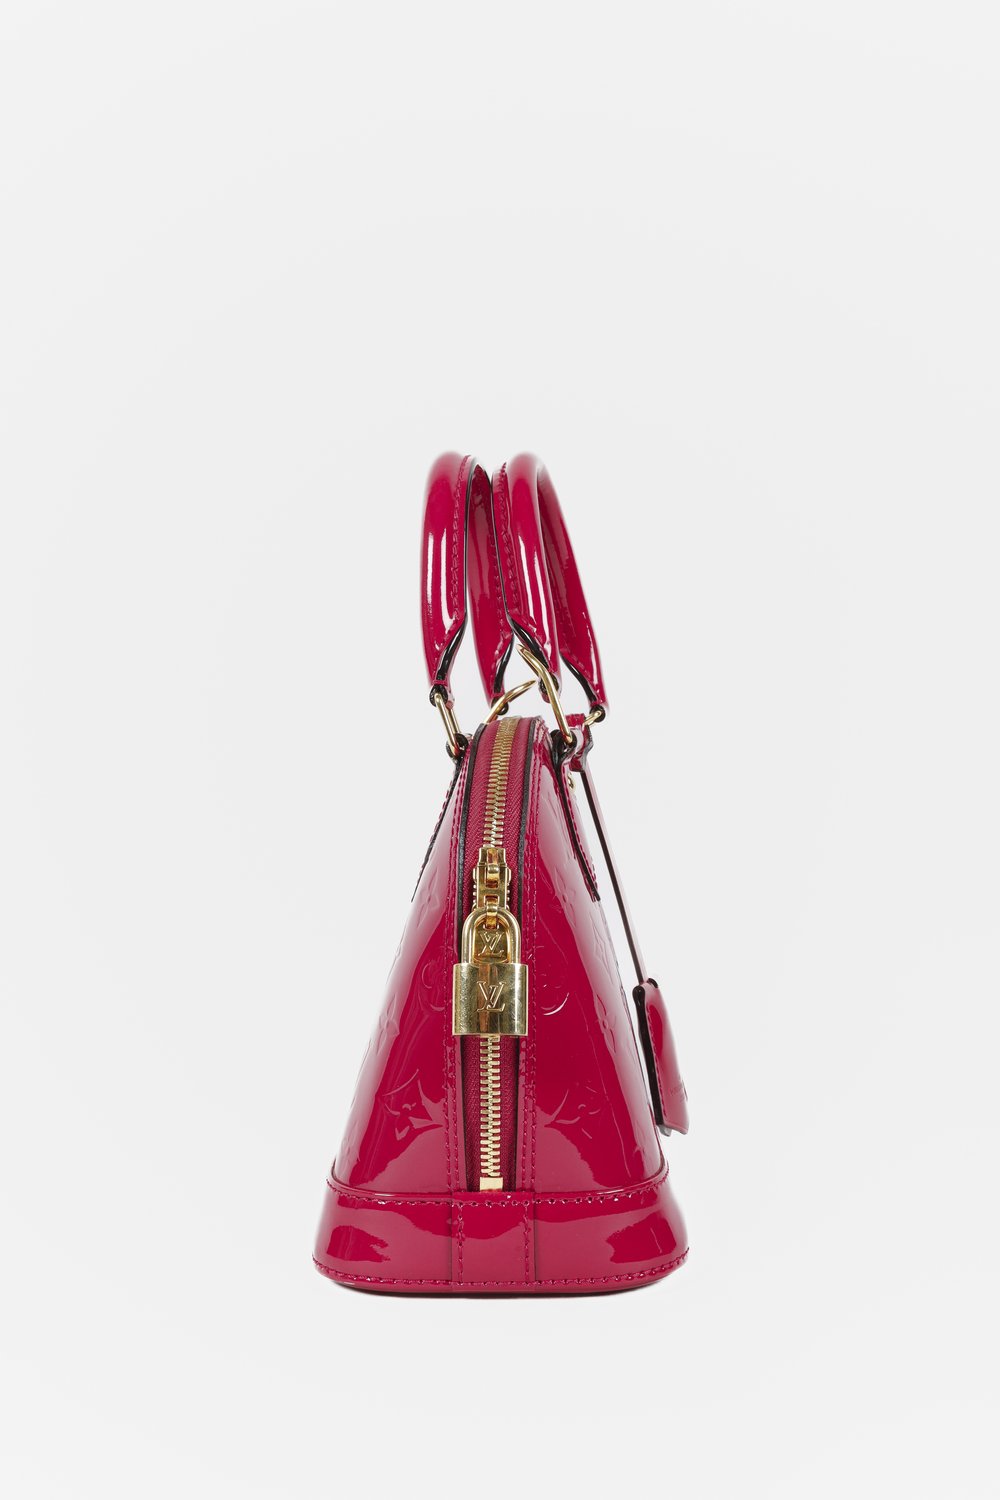 Louis Vuitton Alma Vernis Bb Rose Indien Red Patent Leather Shoulder B -  MyDesignerly